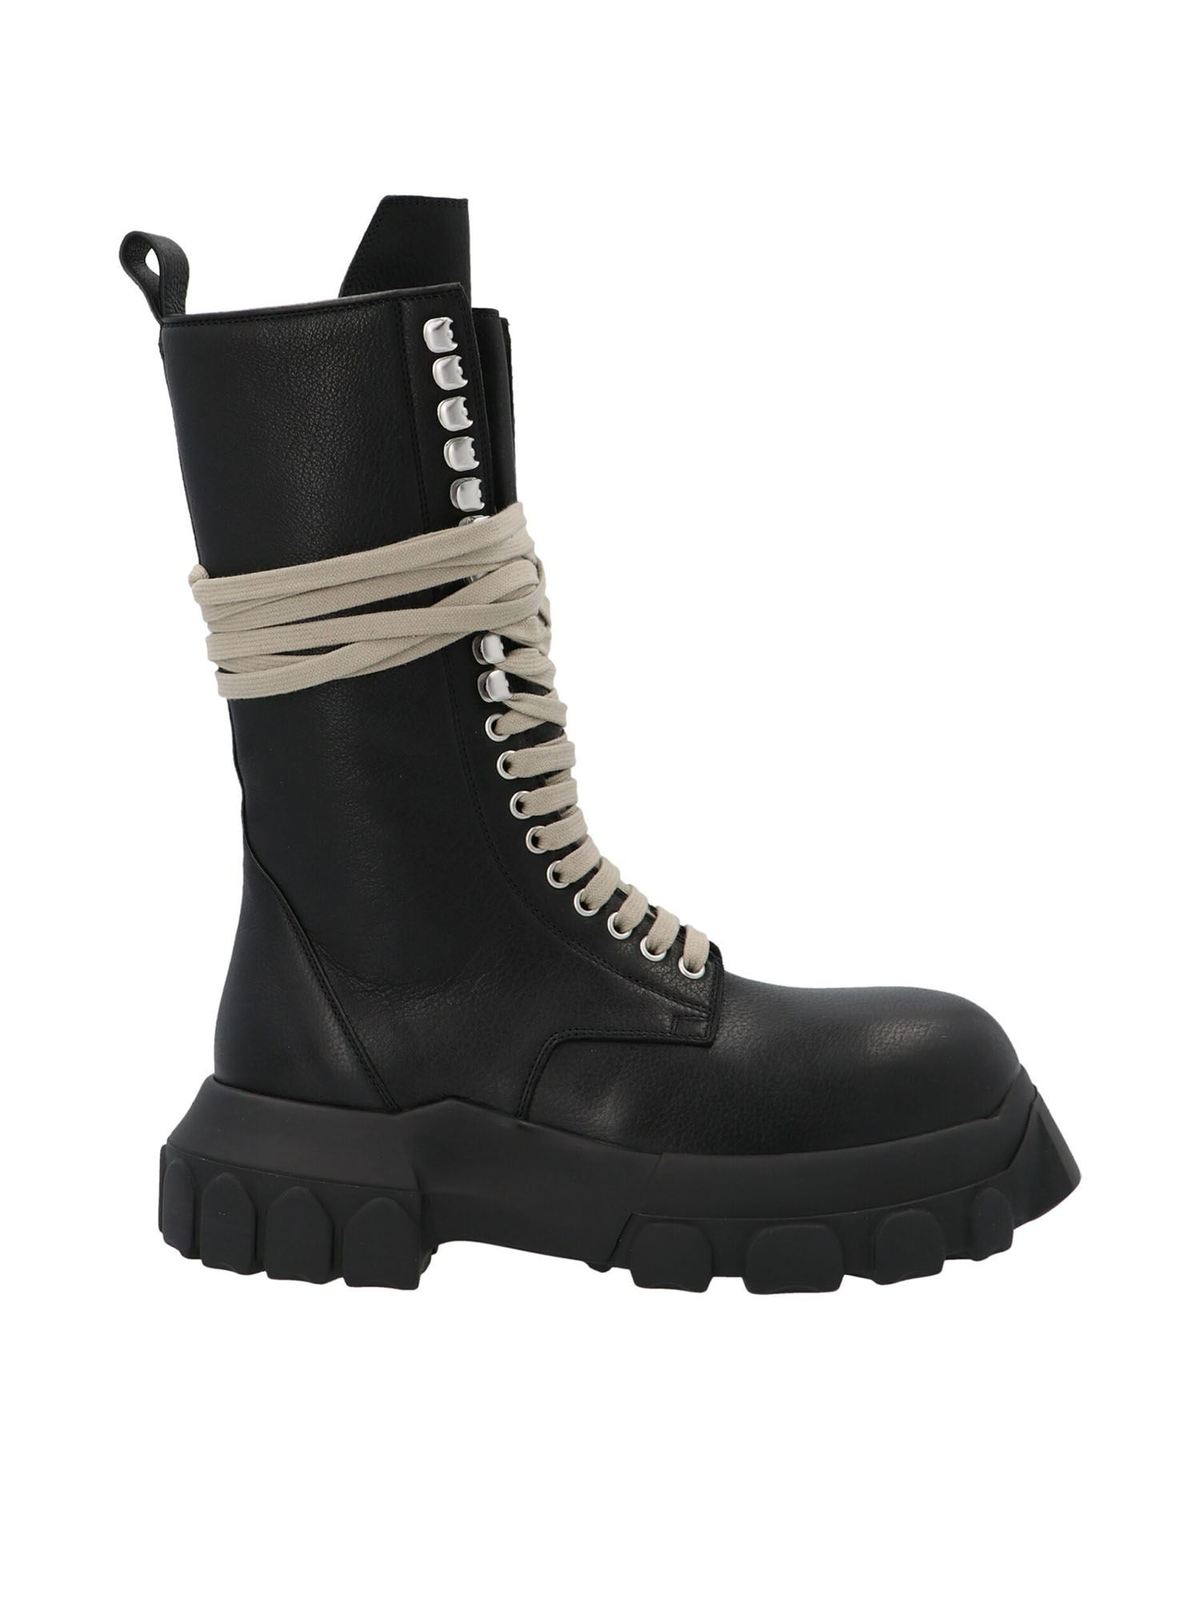 Rick owens tractor. Bozo tractor Rick Owens. Rick Owens Boots. Rick Owens сапоги. Rick Owens tractor Boots.